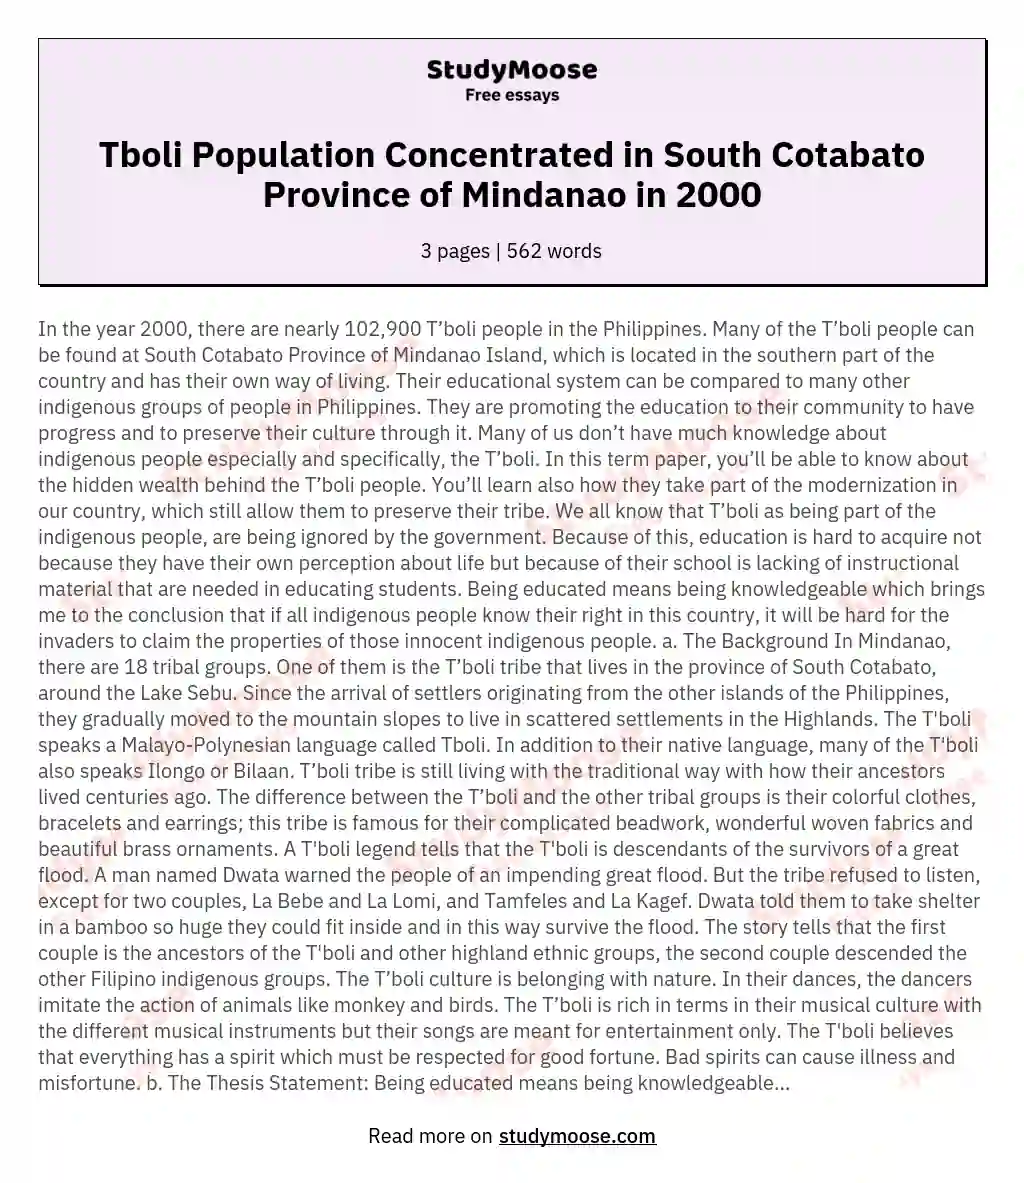 Tboli Population Concentrated in South Cotabato Province of Mindanao in 2000